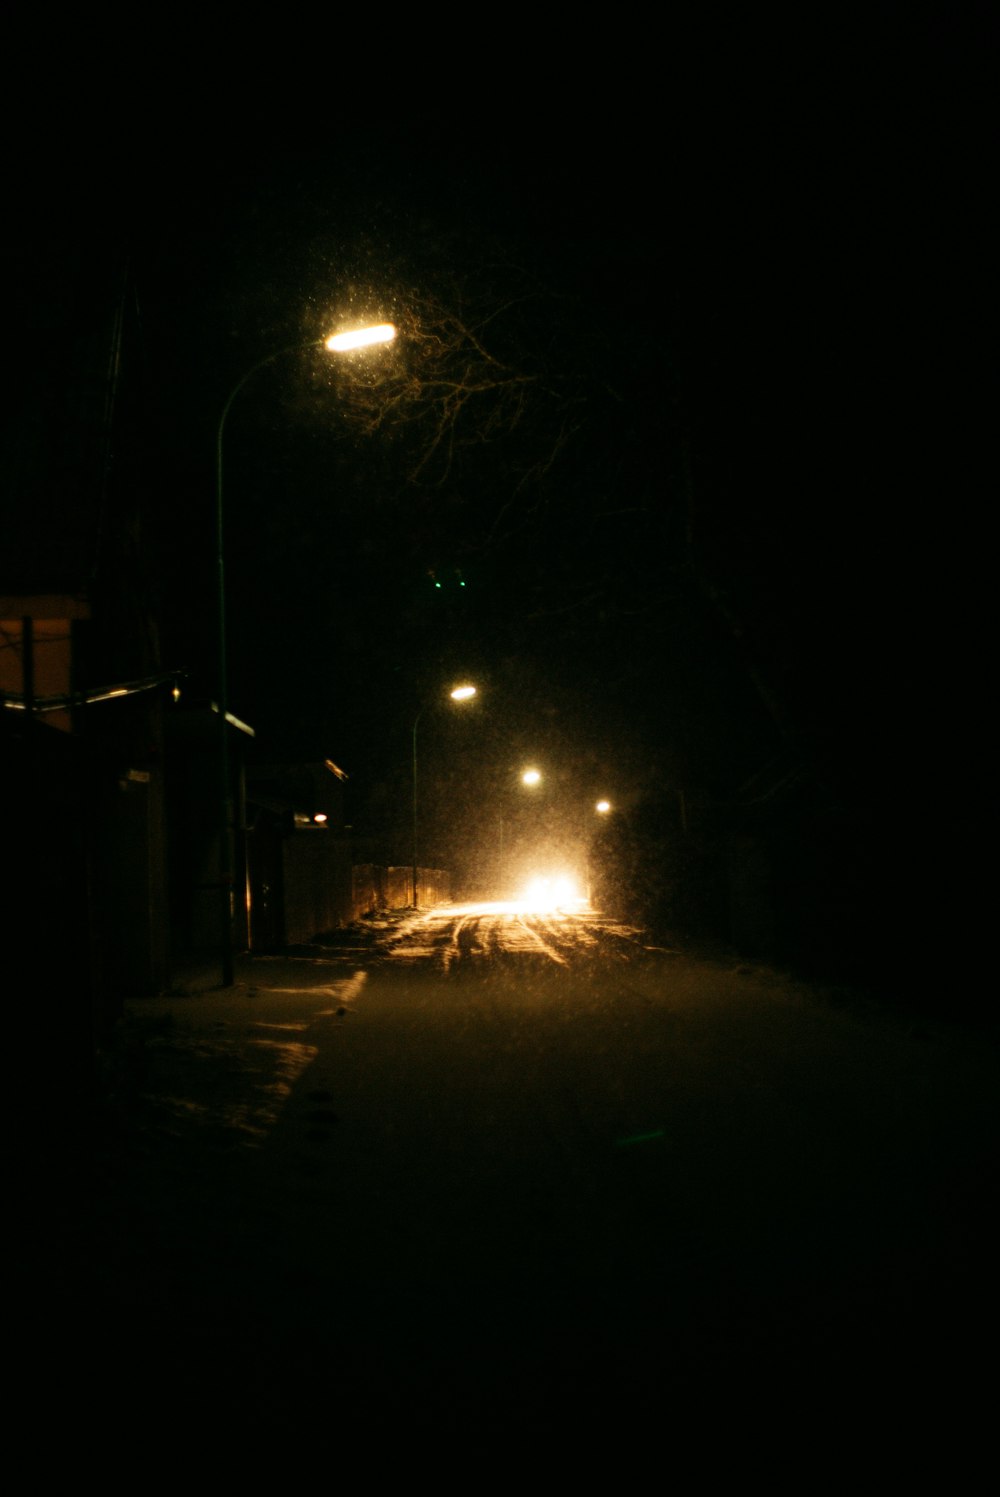 lighted street lamp during night time